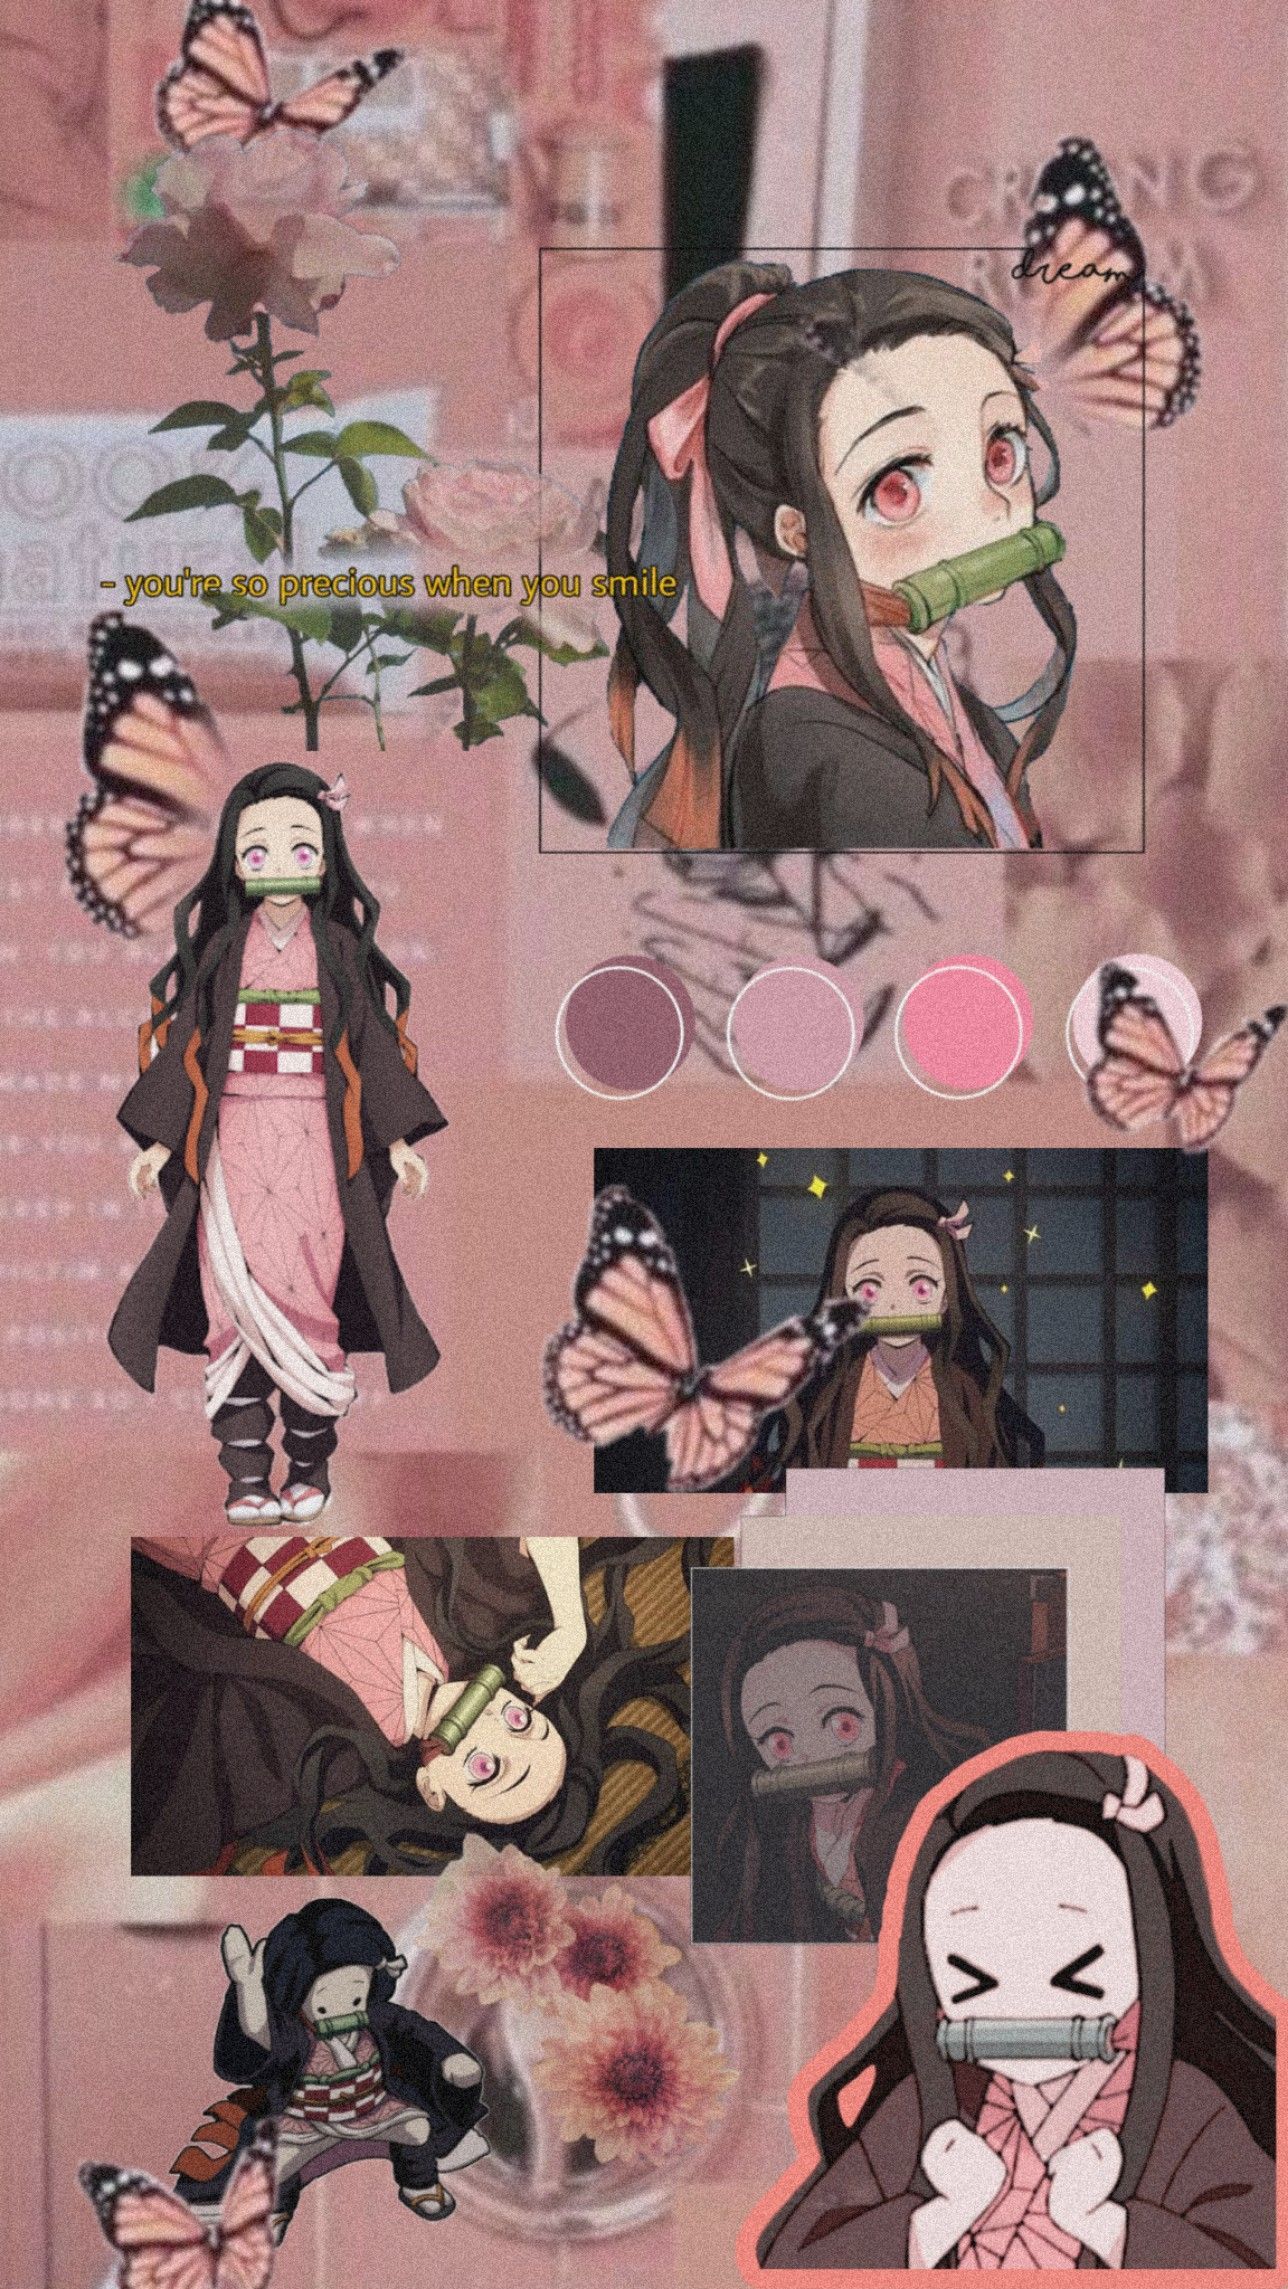 Collage of Nezuko from Demon Slayer with butterfly aesthetic - Nezuko